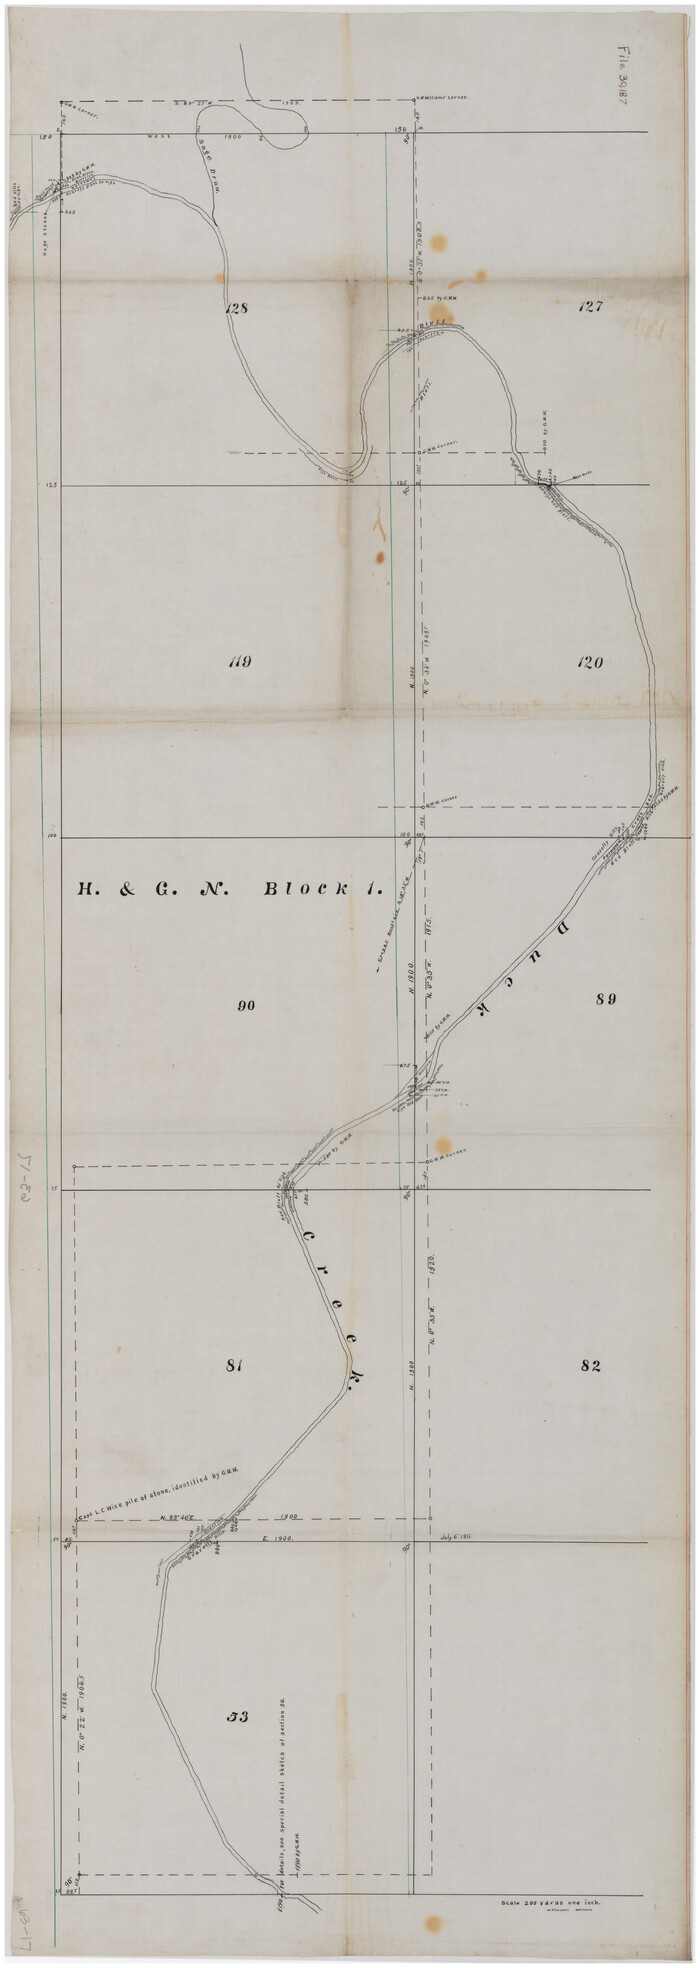 89633, [Sketch showing part of H. & G. N. Block 1], Twichell Survey Records